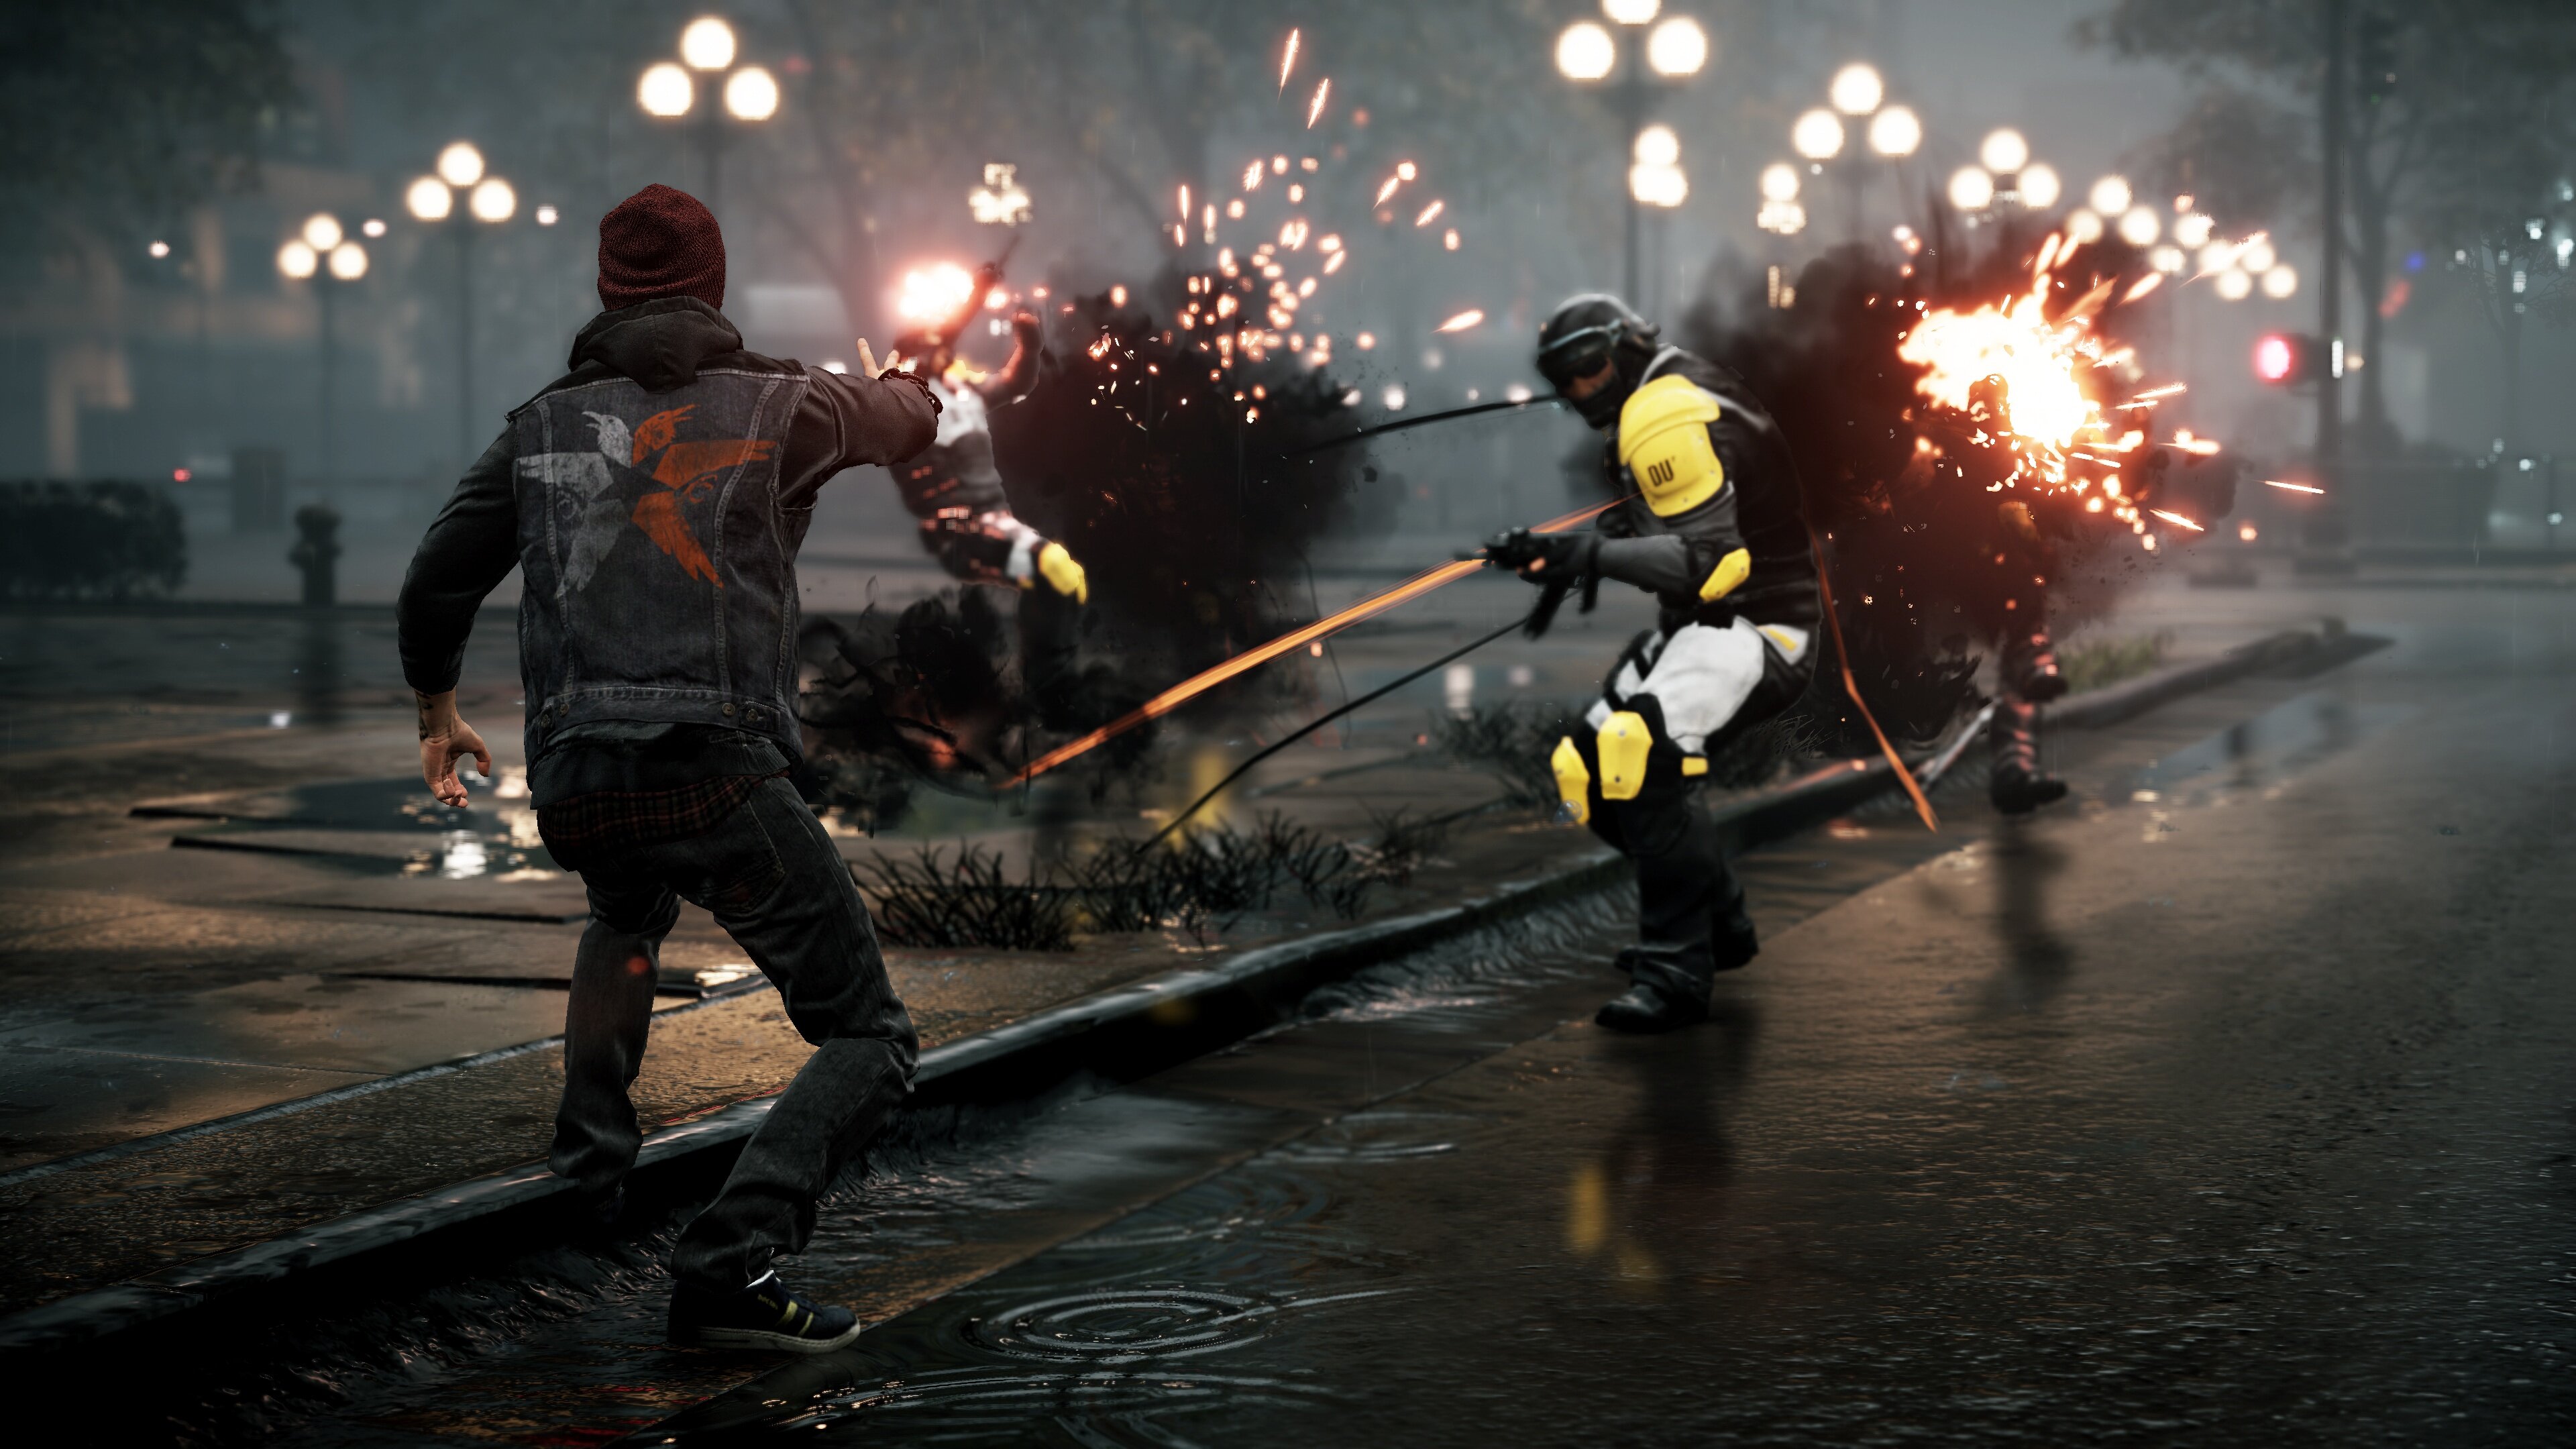 Enjoy the screenshots below and let us know how excited are you about this game?. Infamous: Second Son ...